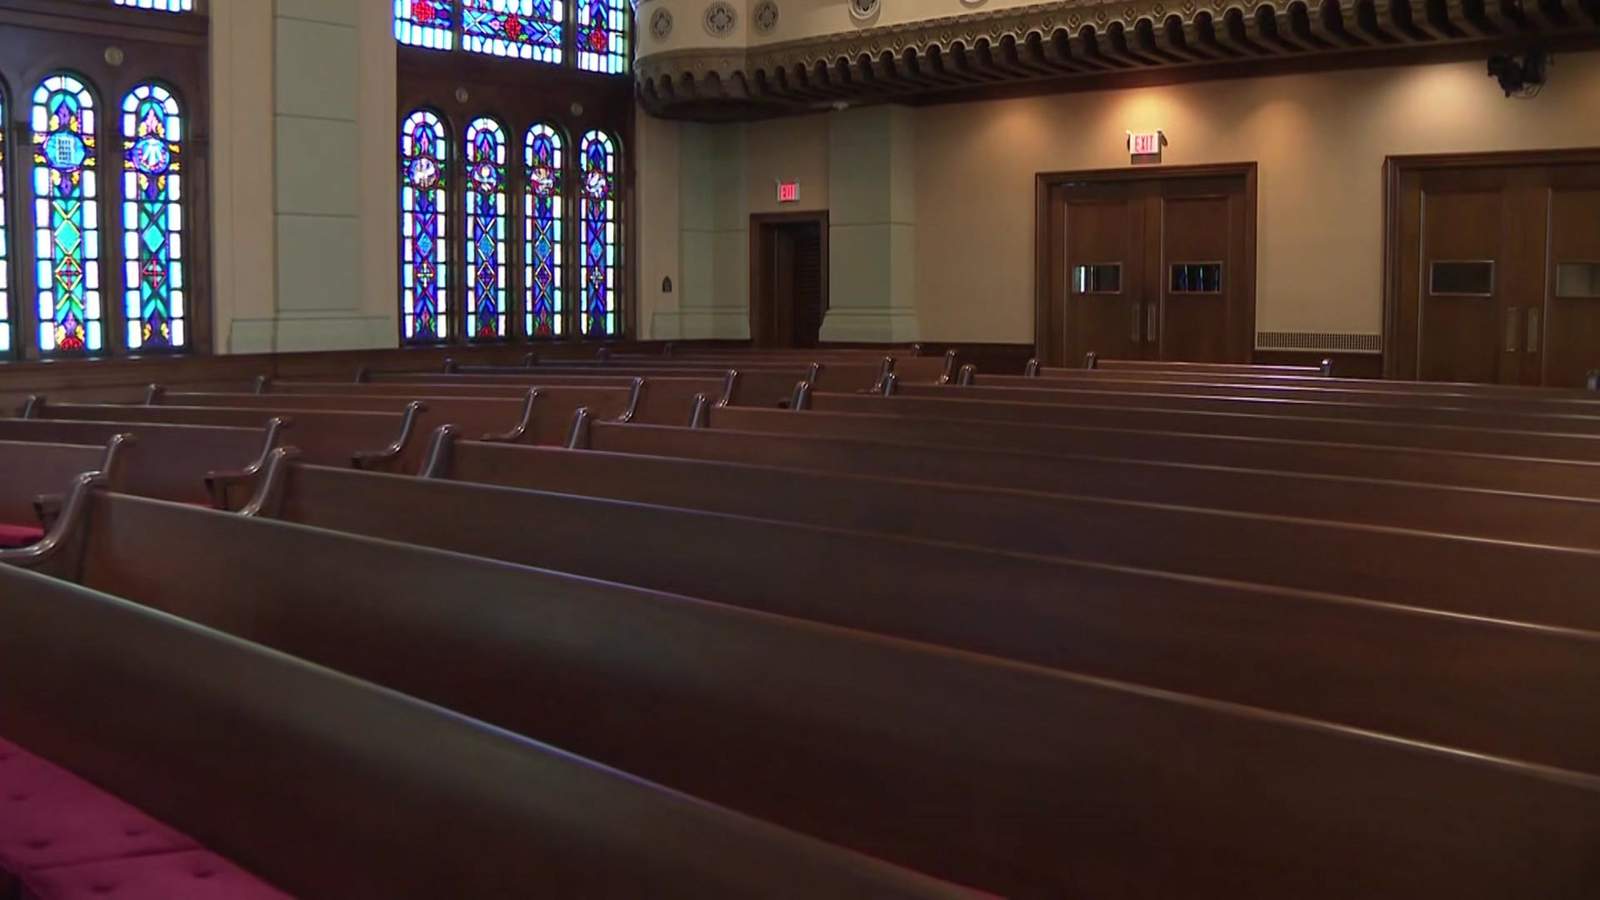 Churches continue to worship online despite now deemed essential by state lawmakers